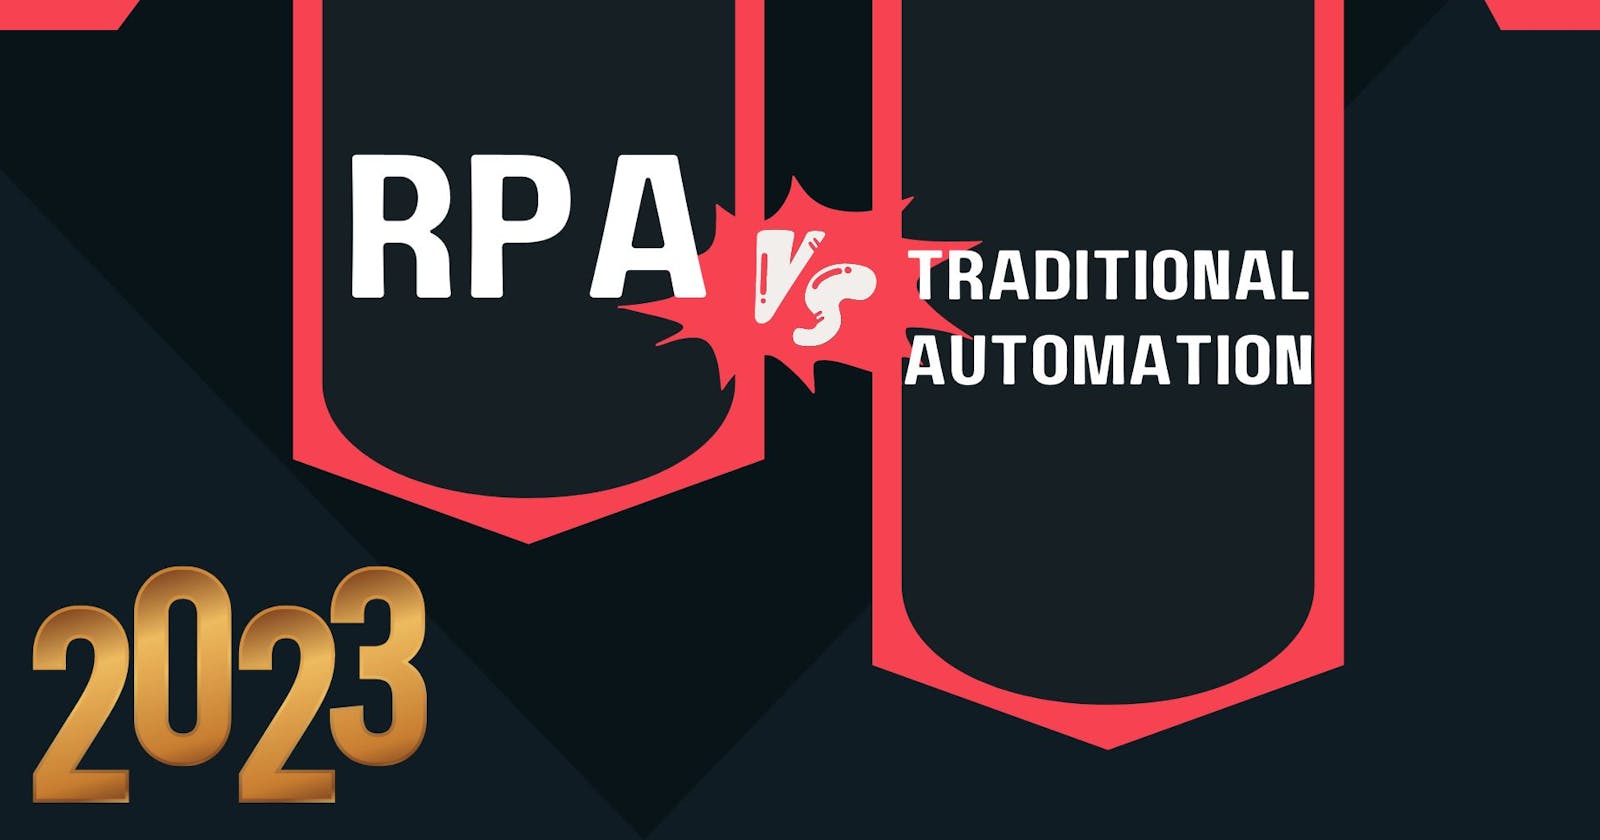 RPA vs. Traditional Automation in 2023